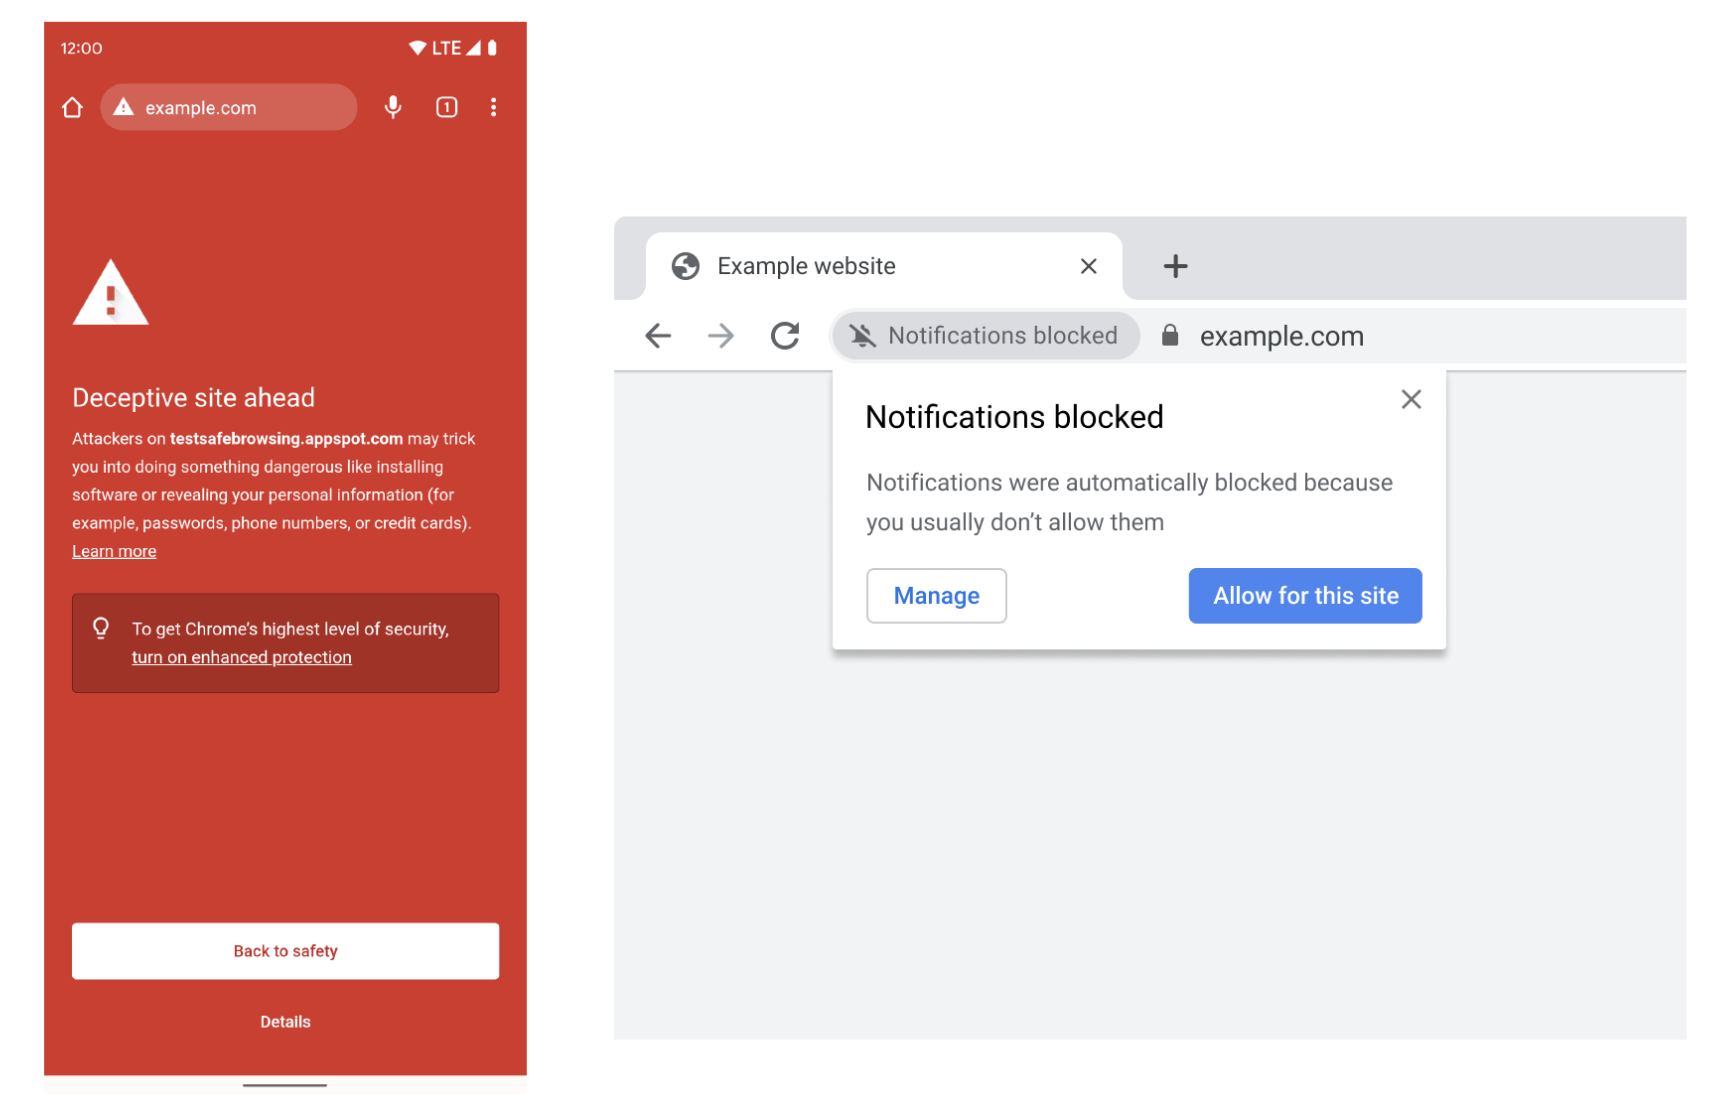 Two images side by side. The first on the left is a smartphone showing a red screen and a warning message about phishing. The image on the right shows a Chrome browser window showing a pop-up message saying “Notifications blocked”. 